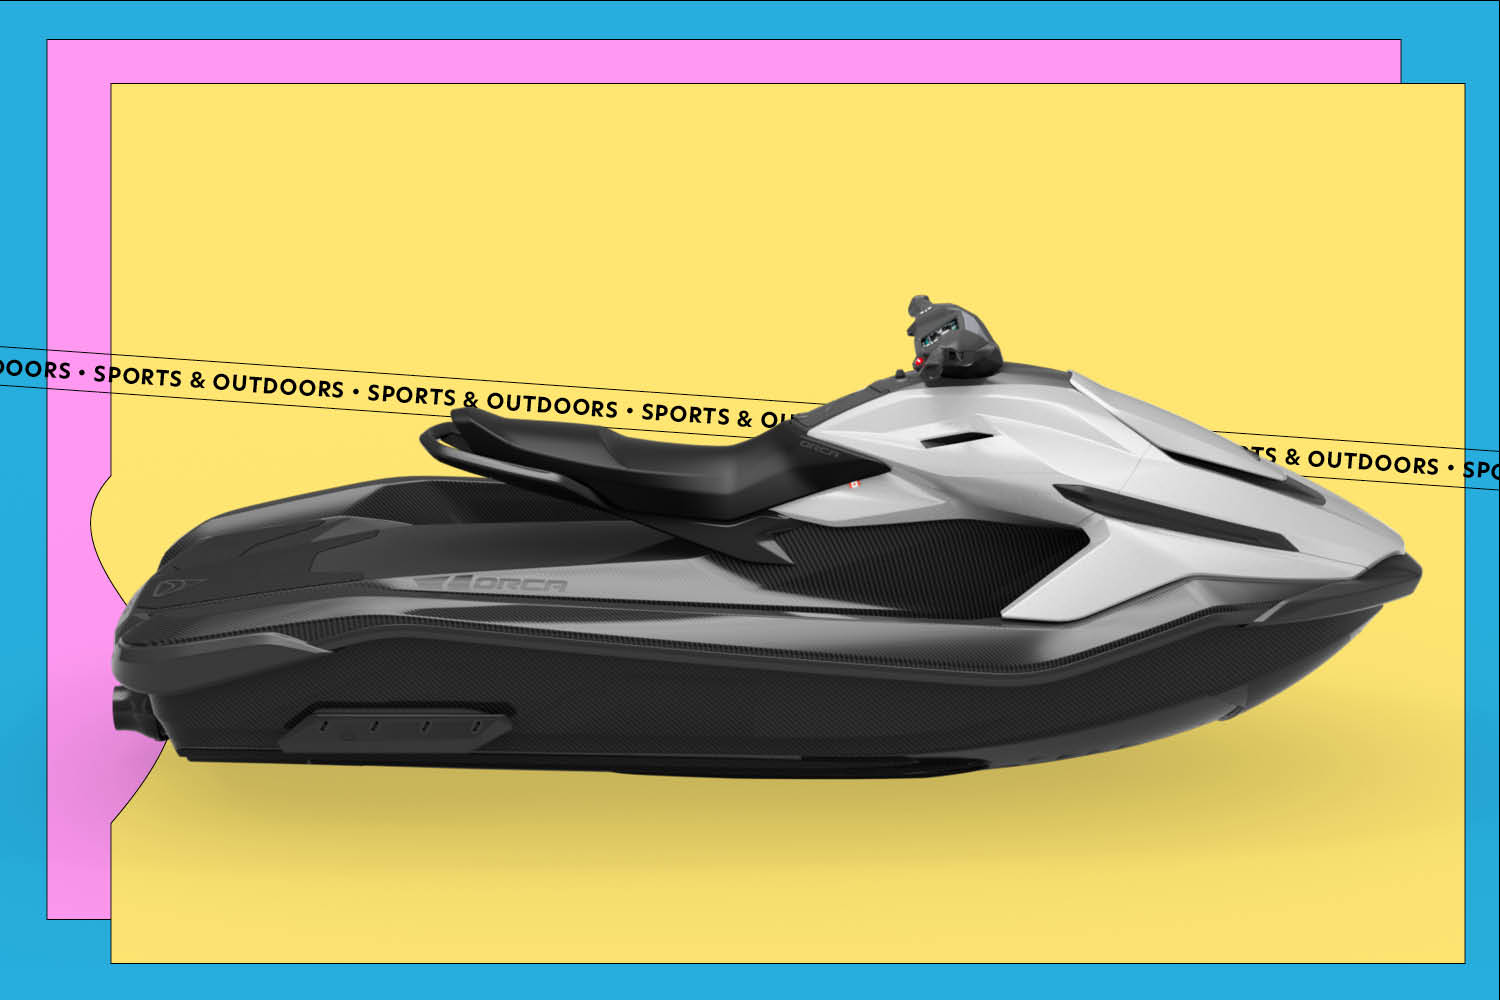 A Taiga Orca Carbon electric personal watercraft on a yellow, pink, and blue background